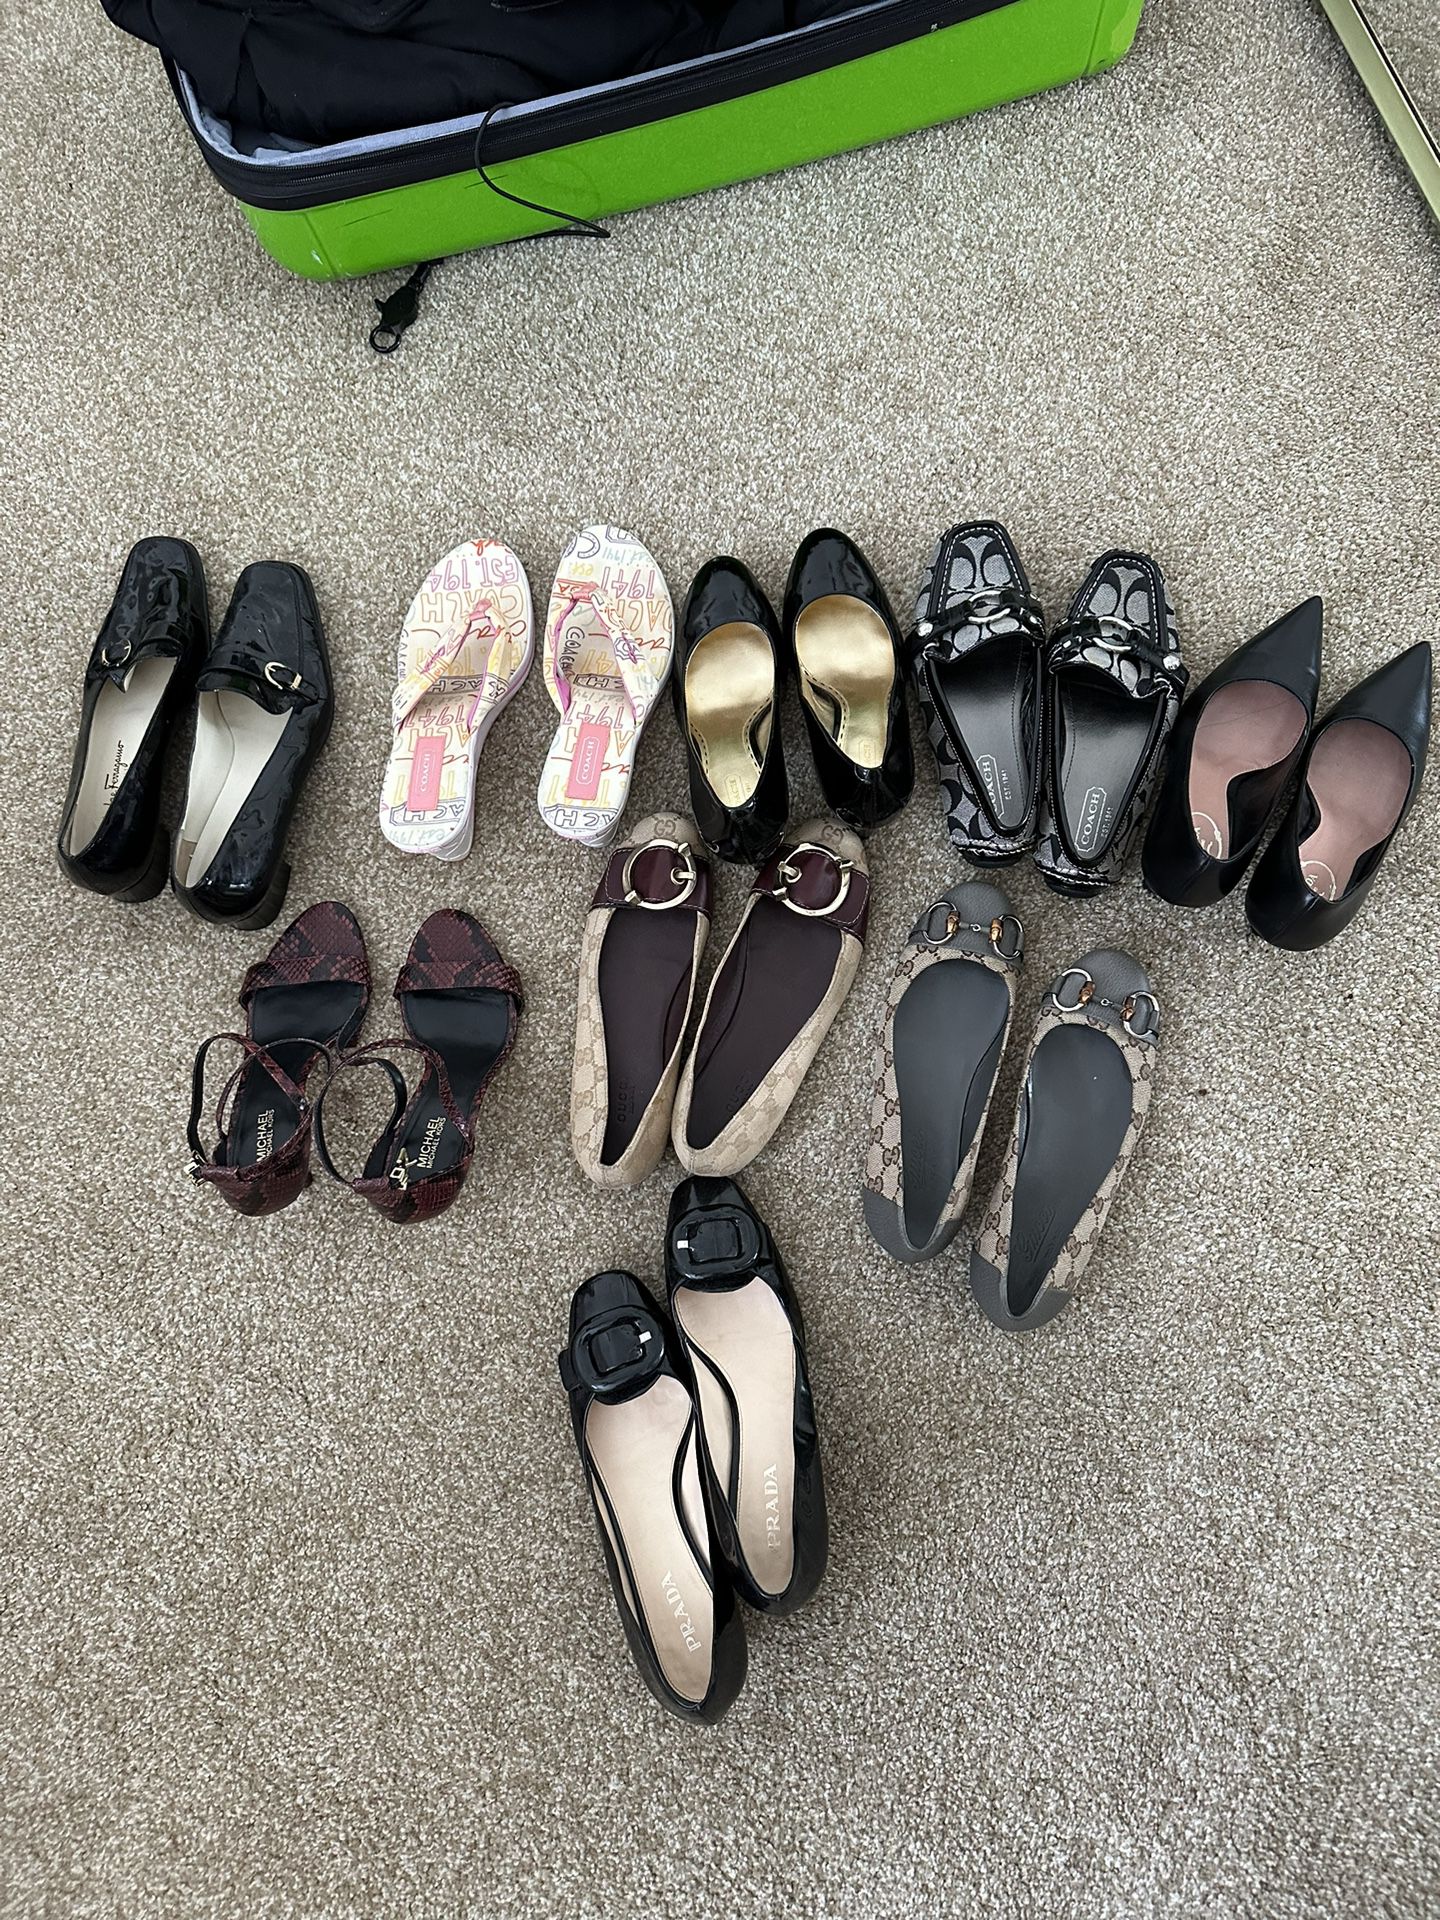 Authentic luxury shoes 9 pairs 